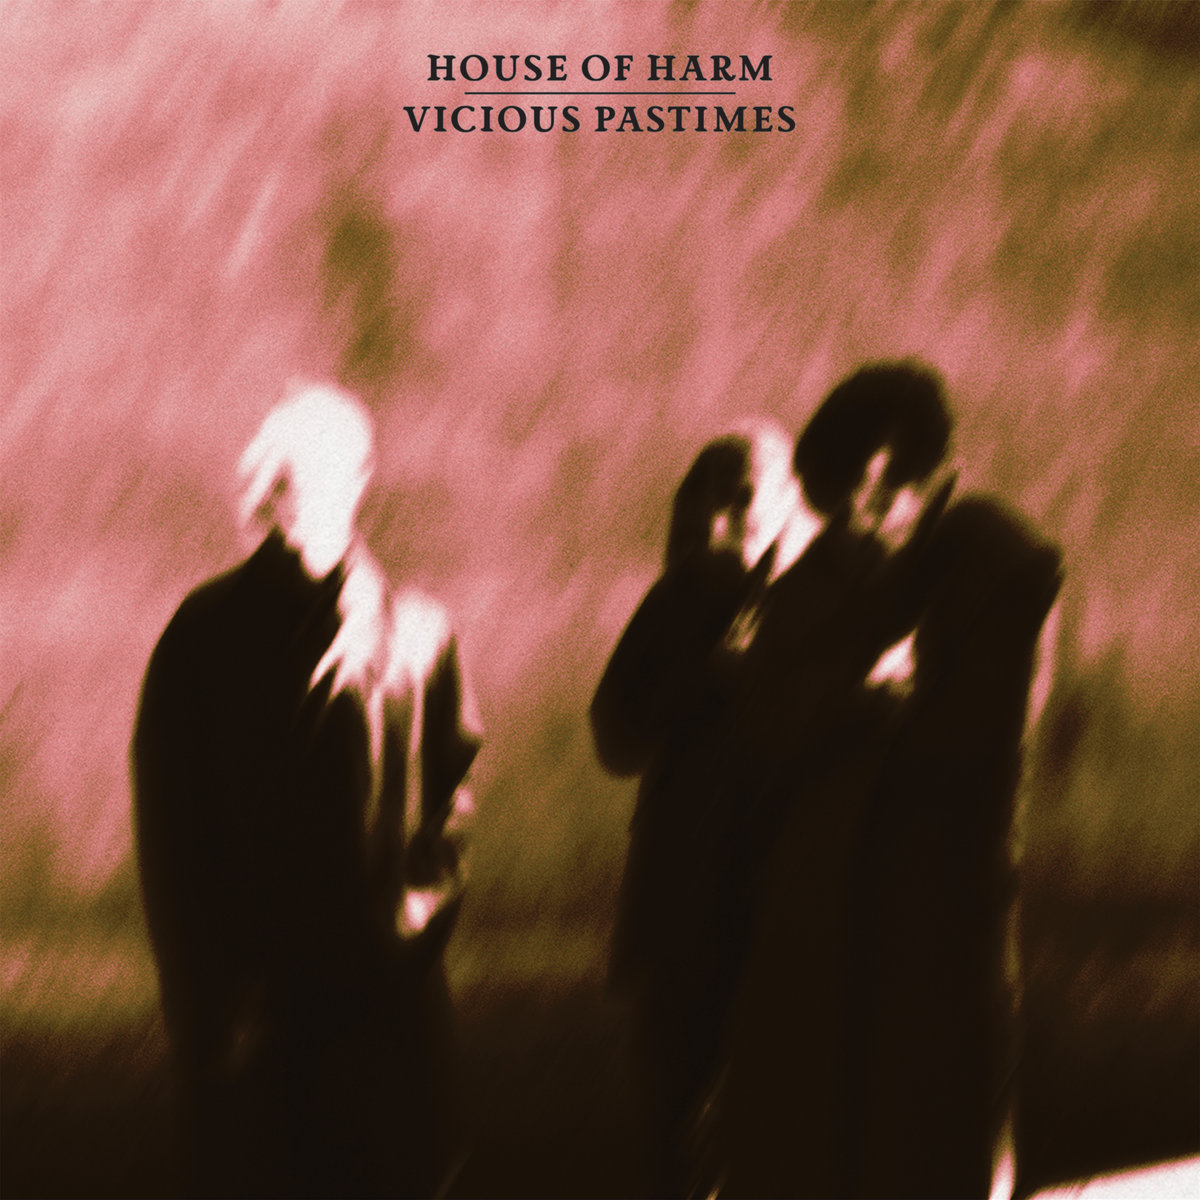 House of Harm, “Vicious Pastimes”